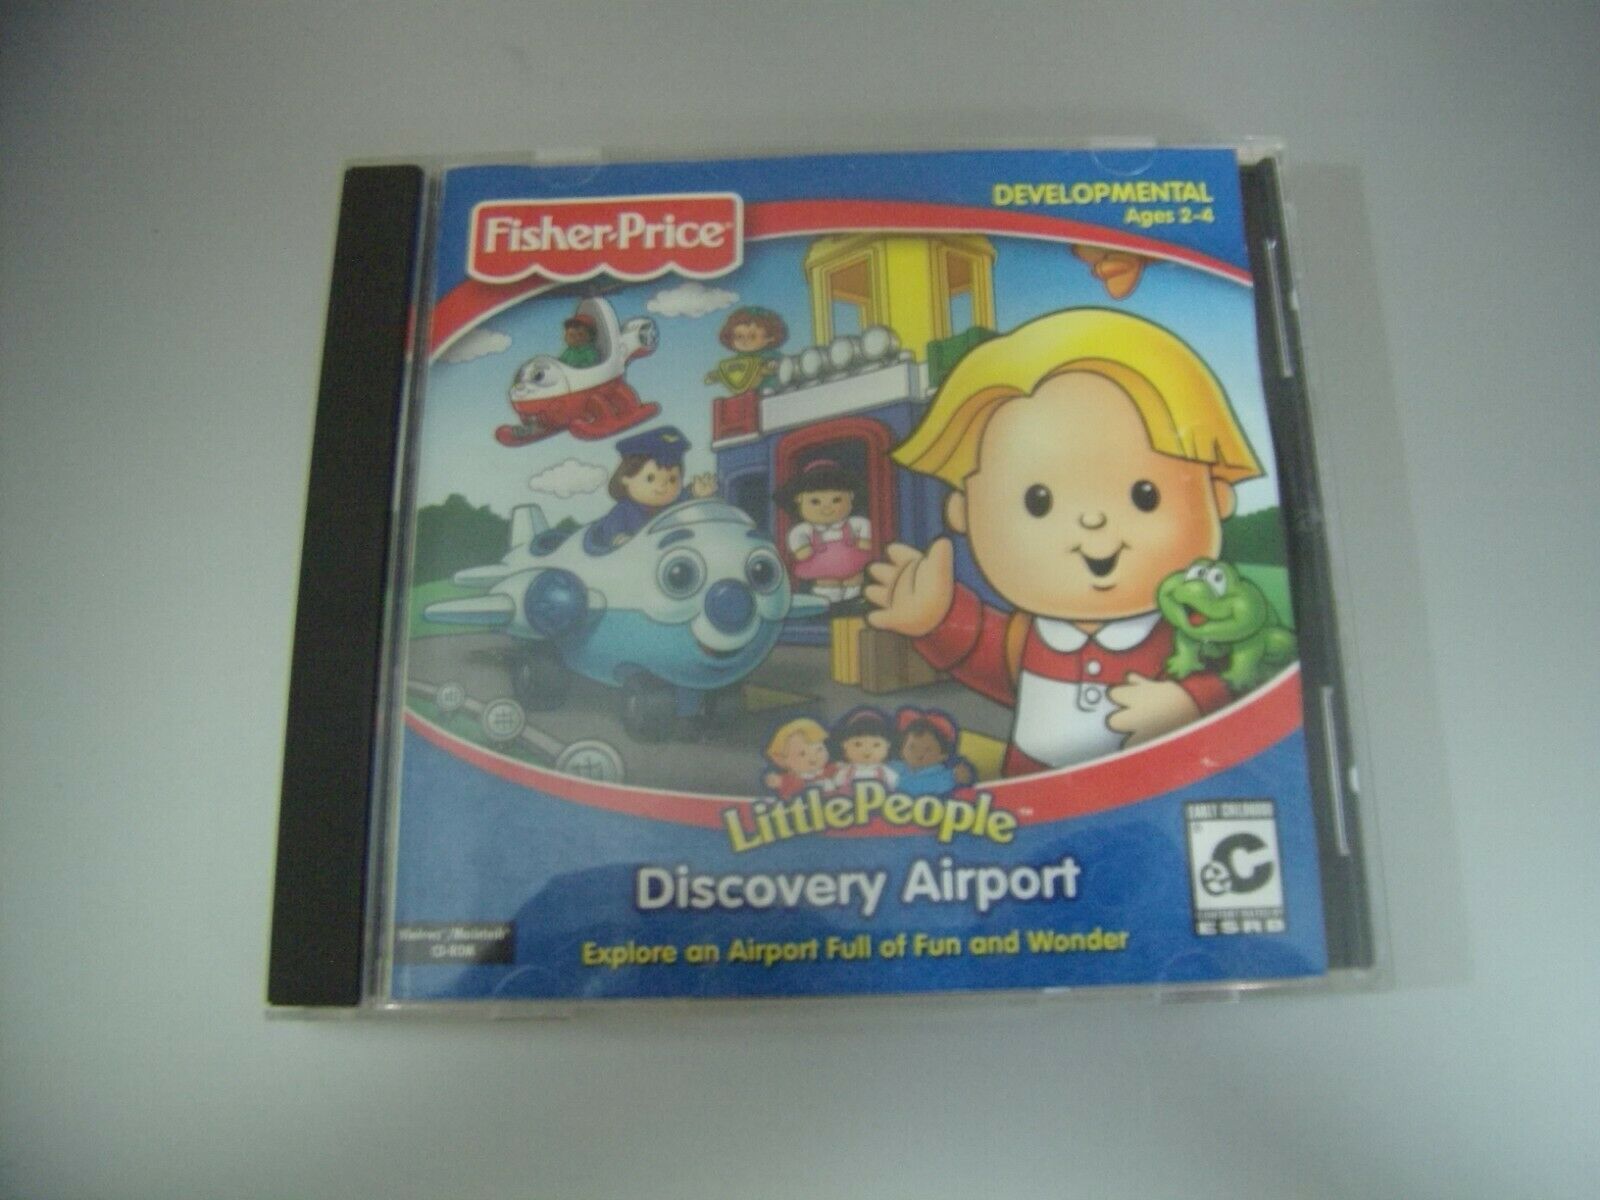 Fisher Price Little People Discovery Airport - Version 1.0c (PC & MAC, 2002) - $26.60